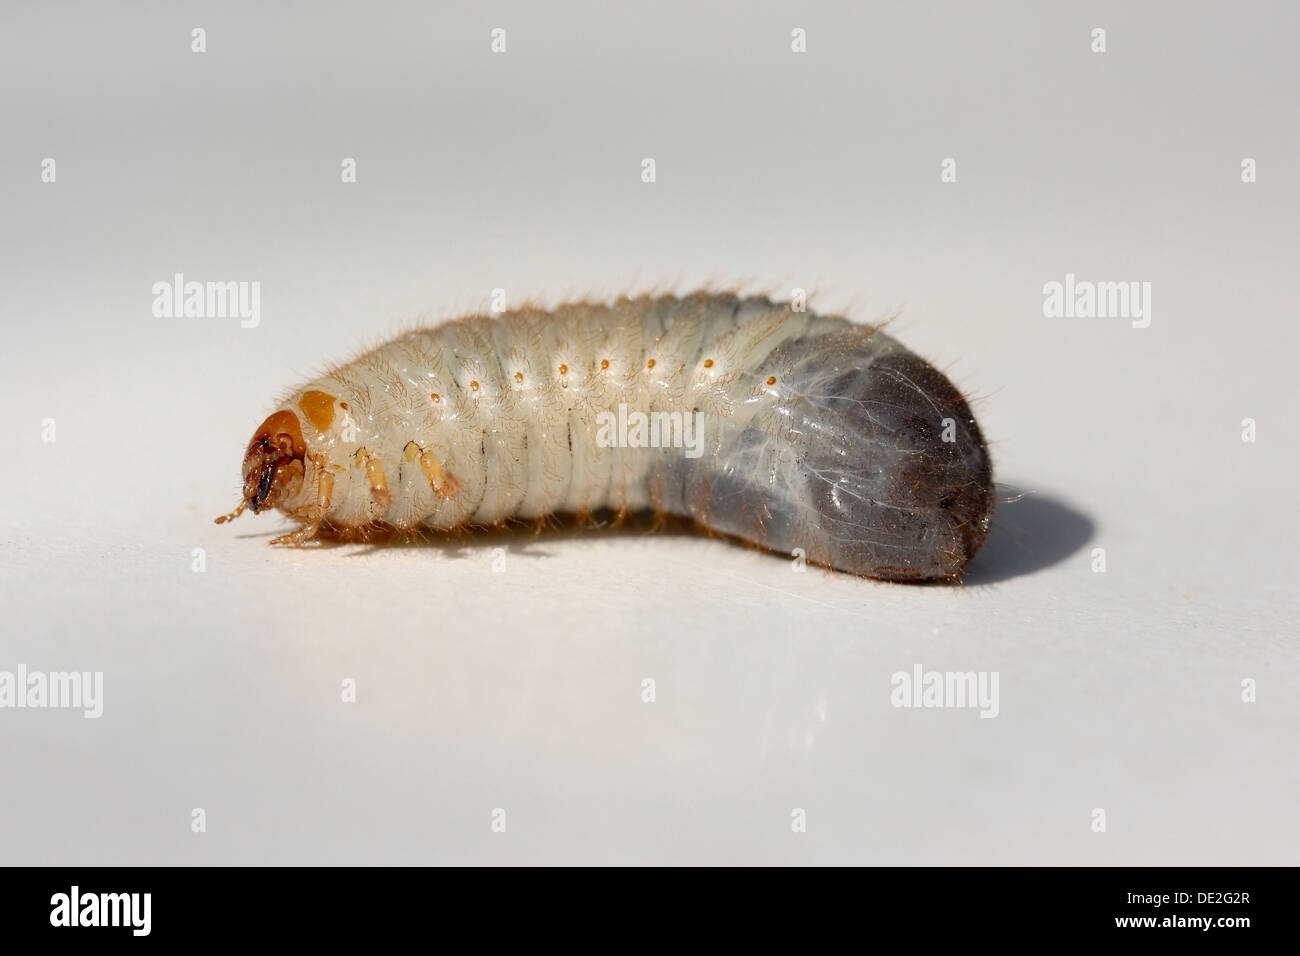 Larva of a Cockchafer (Melolontha) Stock Photo